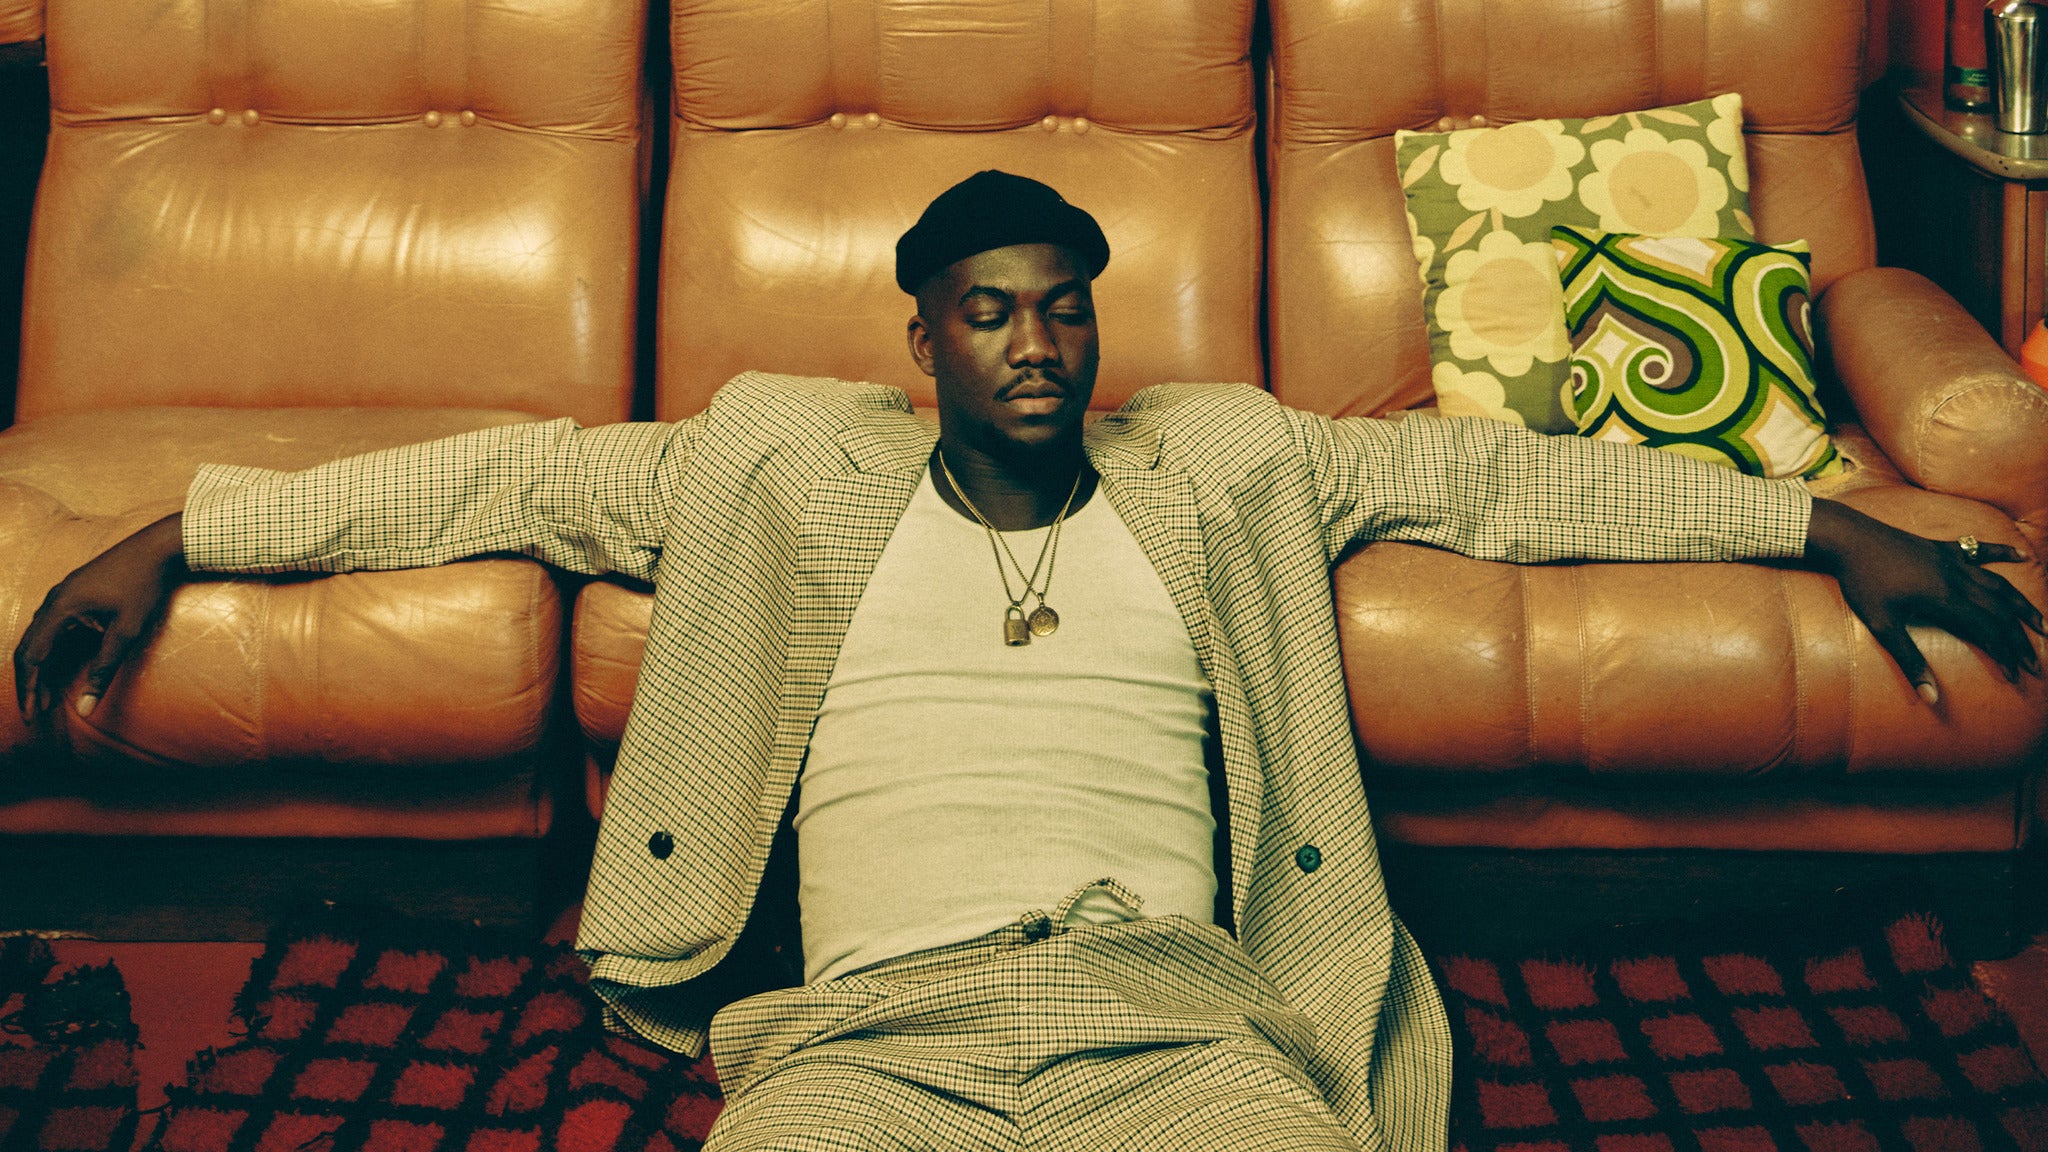 Image used with permission from Ticketmaster | Jacob Banks tickets